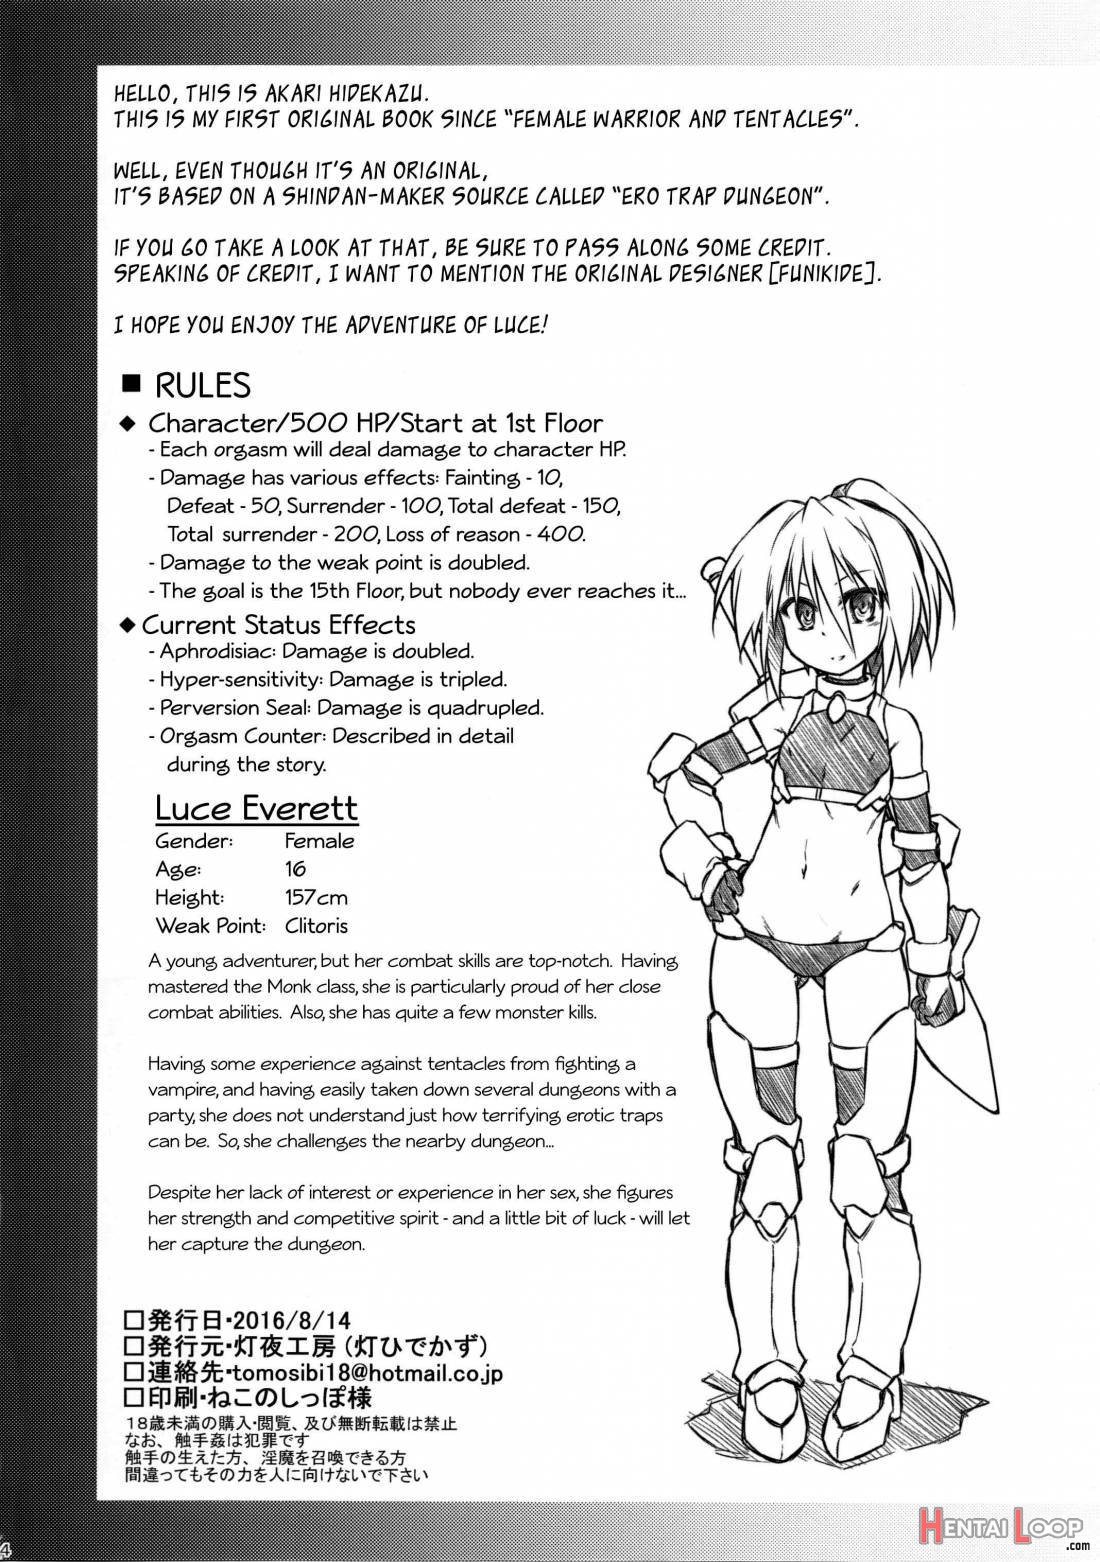 Luce No Ero Trap Dungeon page 3